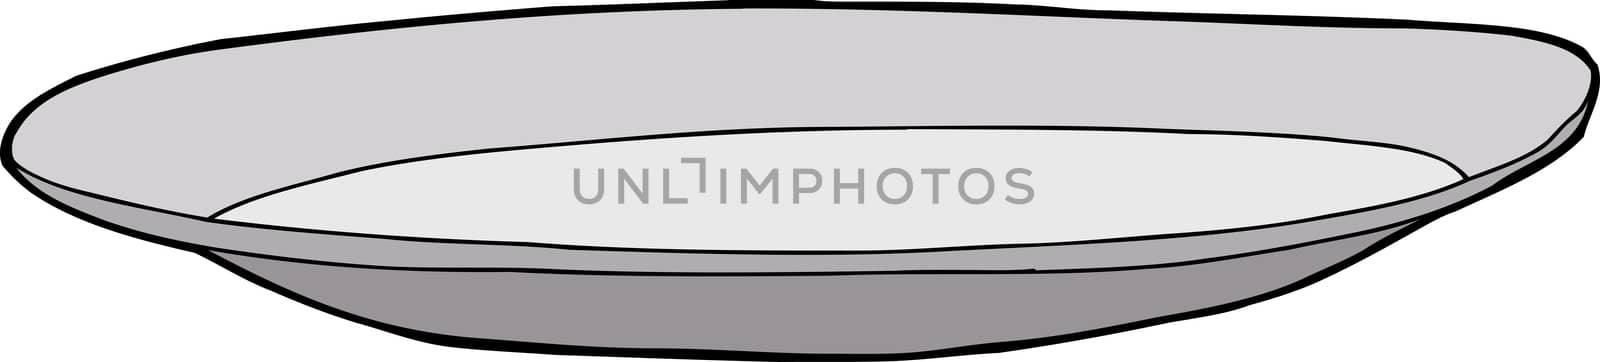 Single hand drawn empty plate over white background